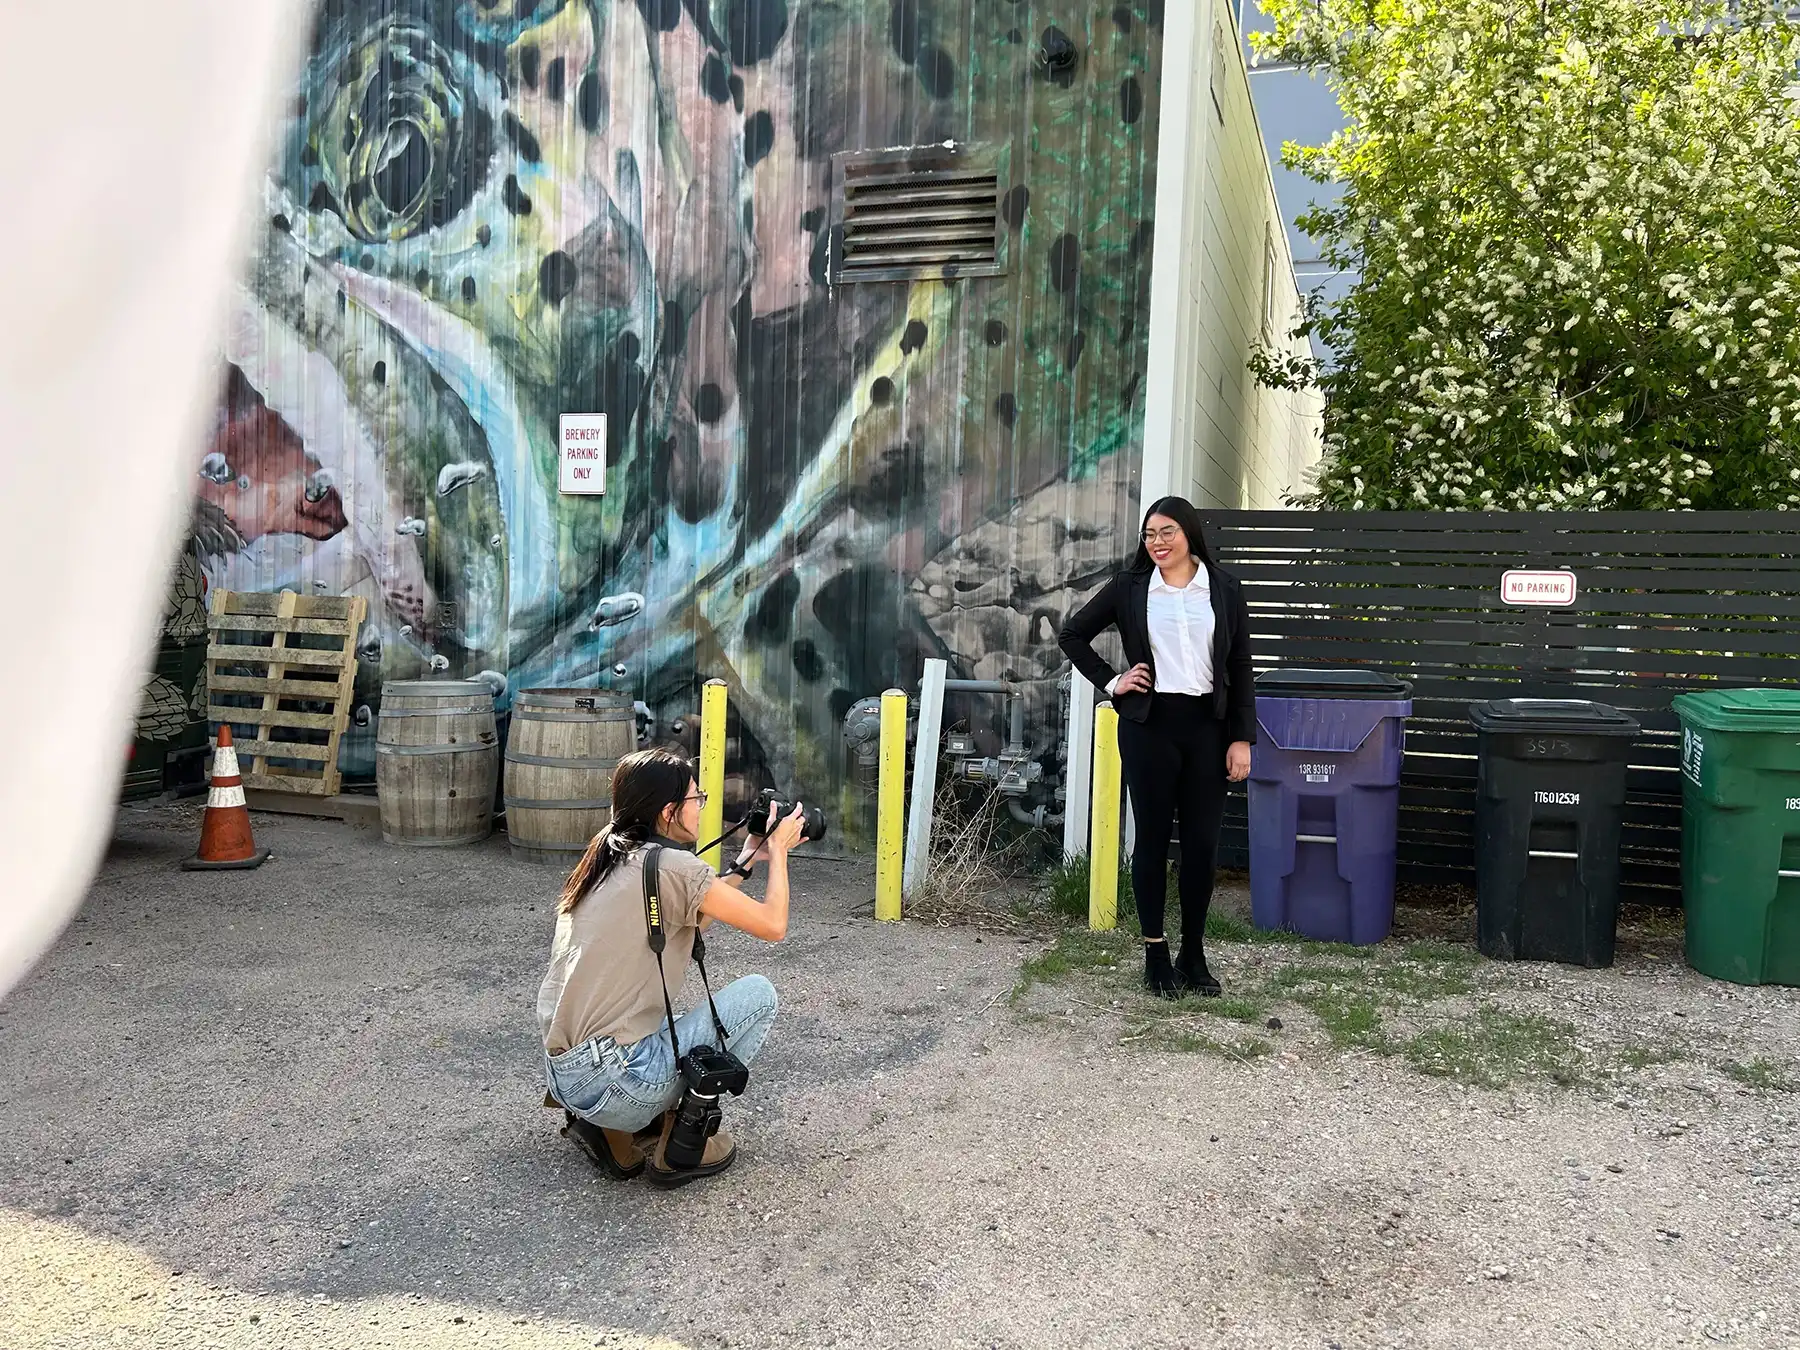 A photographer kneels down to take a picture of dental student Paola Hernandez in front of a wall with a street painting of a fish.